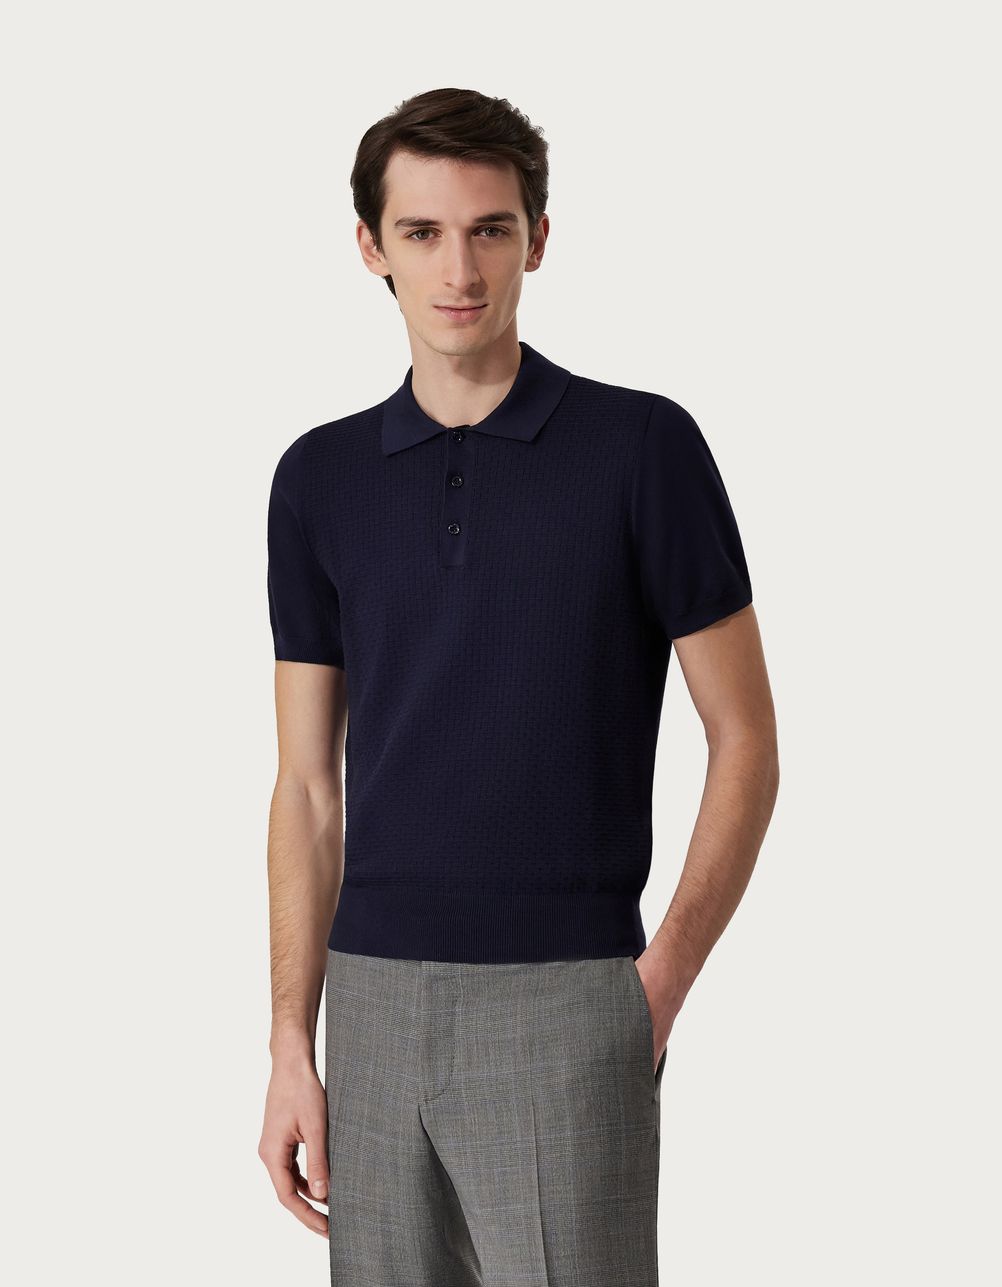 Navy blue polo shirt in garment-dyed cotton